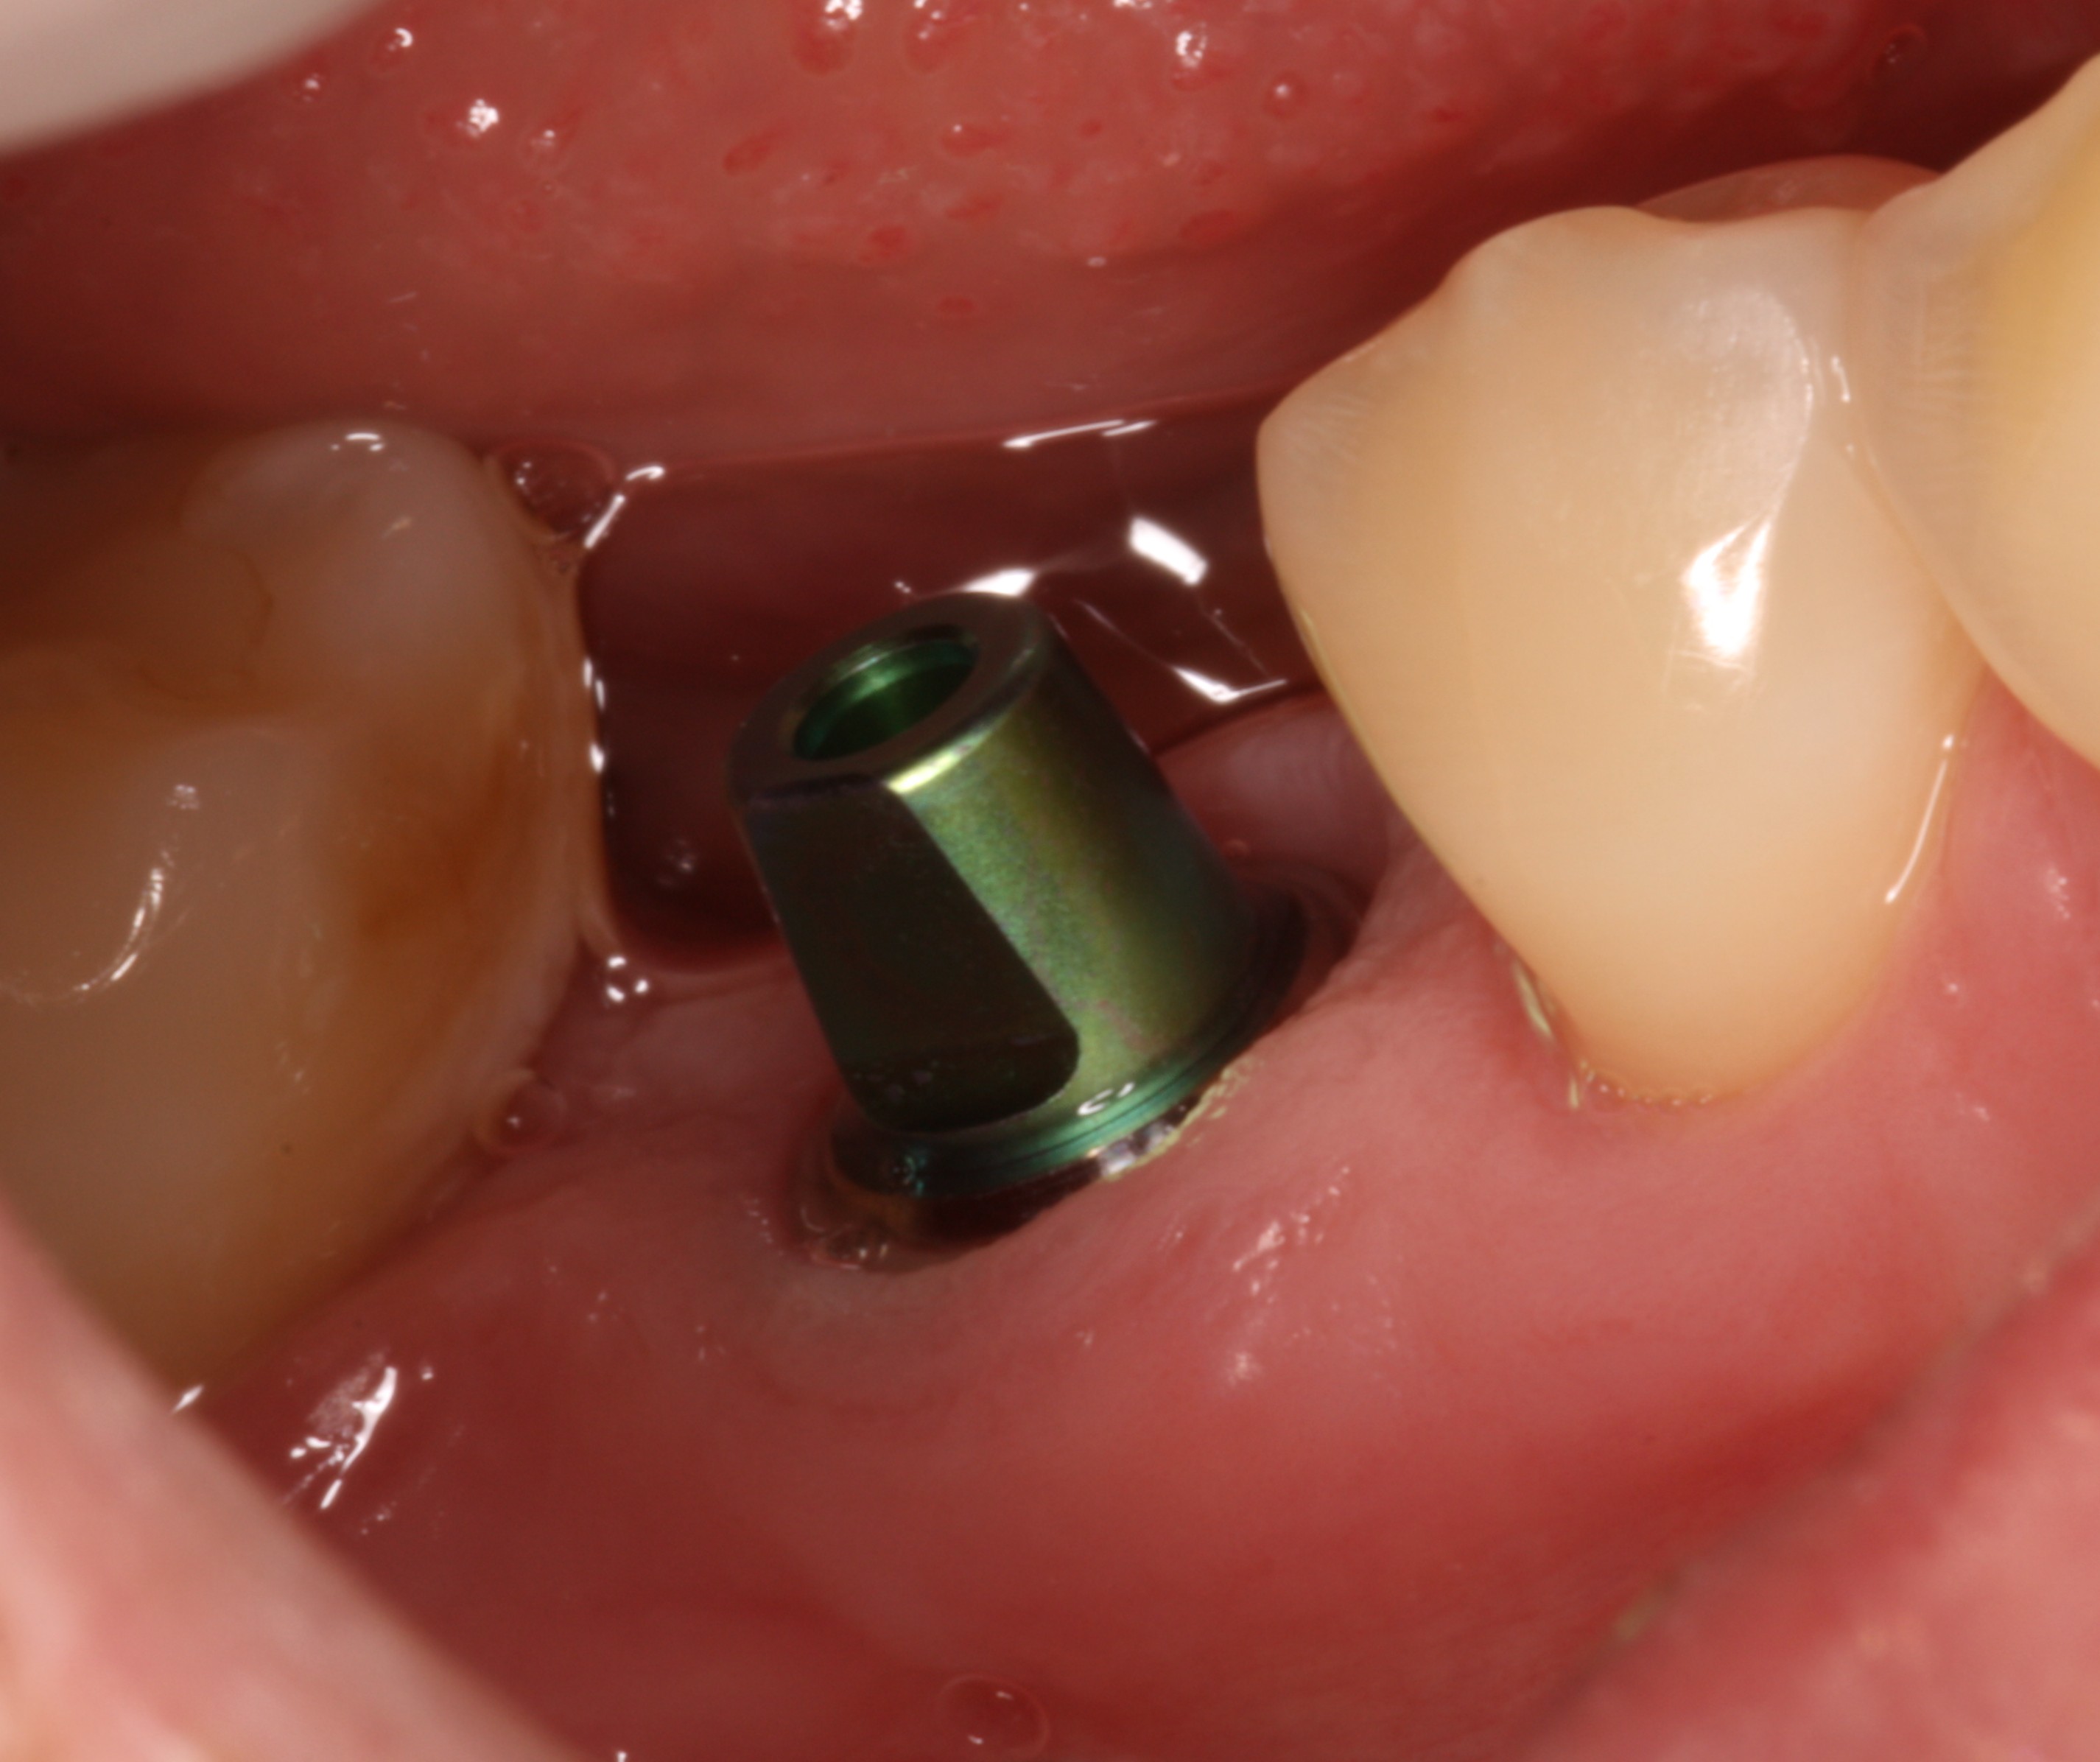 Dental implant with a solid abutment torqued to 35Ncm.